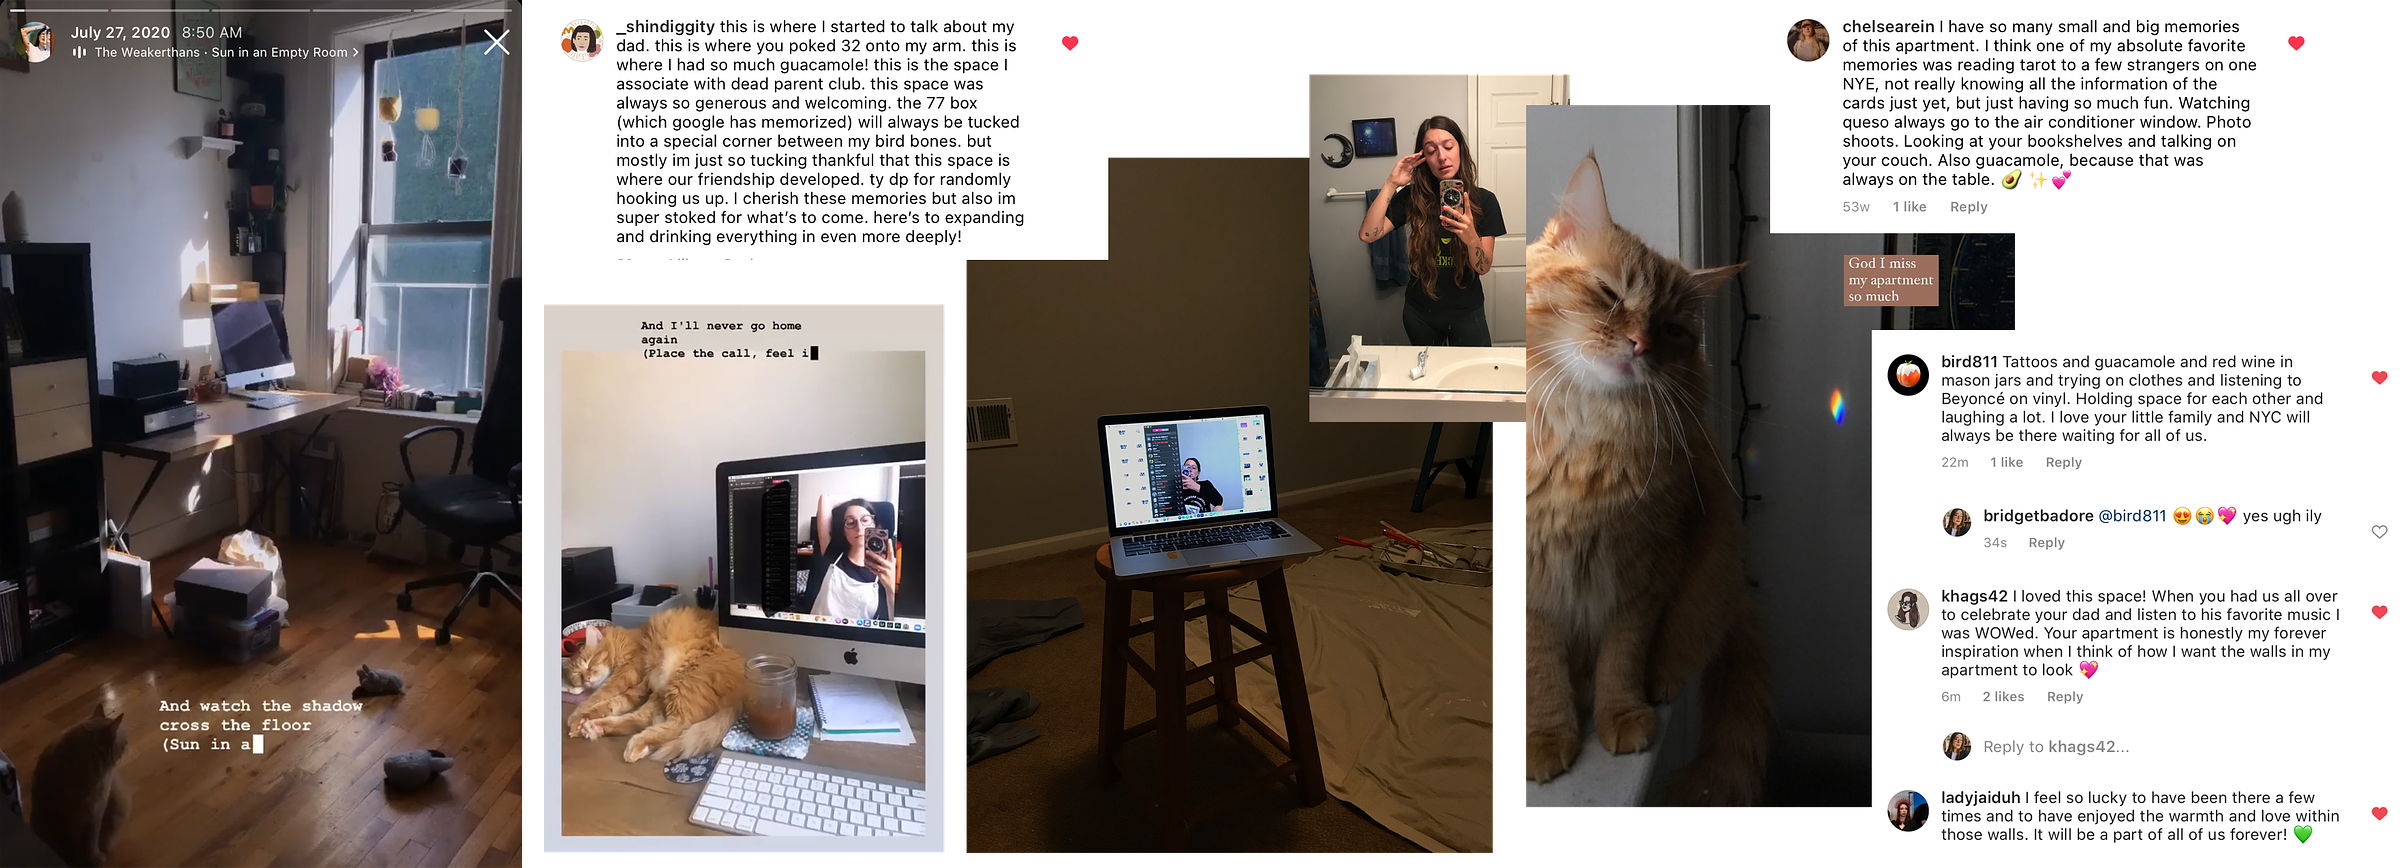 a collage of 5 photographs and 3 screenshots of instagram comments with text. The collage links to an instagram post by Bridget saying goodbye to their apartment at 77 Wyckoff Avenue. From left to right, the images are as follows: 1) a screenshot of an instagram story by Bridget Badore on July 27 2020, 8:50am. The image shows a corner view of an apartment with a window and sunlight shining on the almost empty walls. There are boxes on the floor and trinkets still on the shelves and hanging in the windows. The Weakerthans song “sun in an empty room” is added to the story. 2) Another screenshot of an instagram story. Bridget is taking a selfie in the facetime camera on their desktop computer. An orange cat is asleep to the left of the computer. The lorde song “buzzcut season” is added to the story and the lyrics “I’ll never go home again” are written. 3) a screenshot of an instagram comment by _shindiggity that reads “this is where i started to talk about my dad. this is where you poked 32 onto my arm. this is where i had so much guacamole! this is the space i associate with dead parent club. this space was always so generous and welcoming. the 77 box (which google has memorized) will always be tucked into a special corner between my bird bones. but mostly im just so tucking thankful that this space is where our friendship developed. ty dp for randomly hooking us up. I cherish these moments but also im super stoked for what’s to come. here’s to expanding and drinking everything in even more deeply!” 4) a phone selfie in the facetime camera of bridget’s laptop computer, now sitting atop a stool in an empty, dark, carpeted room with painting supplies and dropcloth on the floor. 5) a bathroom mirror selfie where bridget appears to be crying, face red, wiping their eyes. 6) fluffy orange cat in a window with a rainbow prism reflecting off the walls. Text atop reads “god i miss my apartment so much.” 7) another instagram comment, from chelsearein: “I have so many small and big memories of this apartment. i think one of my absolute favorite memories was reading tarot to a few strangers on one NYE, not really knowing all the information of the cards yet, but having so much fun. Watching queso always go to the air conditioner window. Photo shoots. Looking at your bookshelves and talking on your couch. Also guacamole, because that was always on the table.” 8) one last screenshot of instagram comments. This screenshot features 3 comments. First, from bird811: “tattoos and guacamole and red wine in mason jars and trying on clothes and listening to beyonce on vinyl. holding space for each other and laughing a lot. I love your little family and nyc will always be there waiting for all of us.” The 2nd comment, from khags42: “i loved this space! when you had us all over to celebrate your dad and listen to his favorite music i was WOWed. Your apartment is honestly my forever inspiration when I think of how I want the walls in my apartment to look.” 3rd caption, from ladyjaiduh: “I feel so lucky to have been there a few times and to have enjoyed the warmth and love within those walls. It will be a part of all of us forever.”